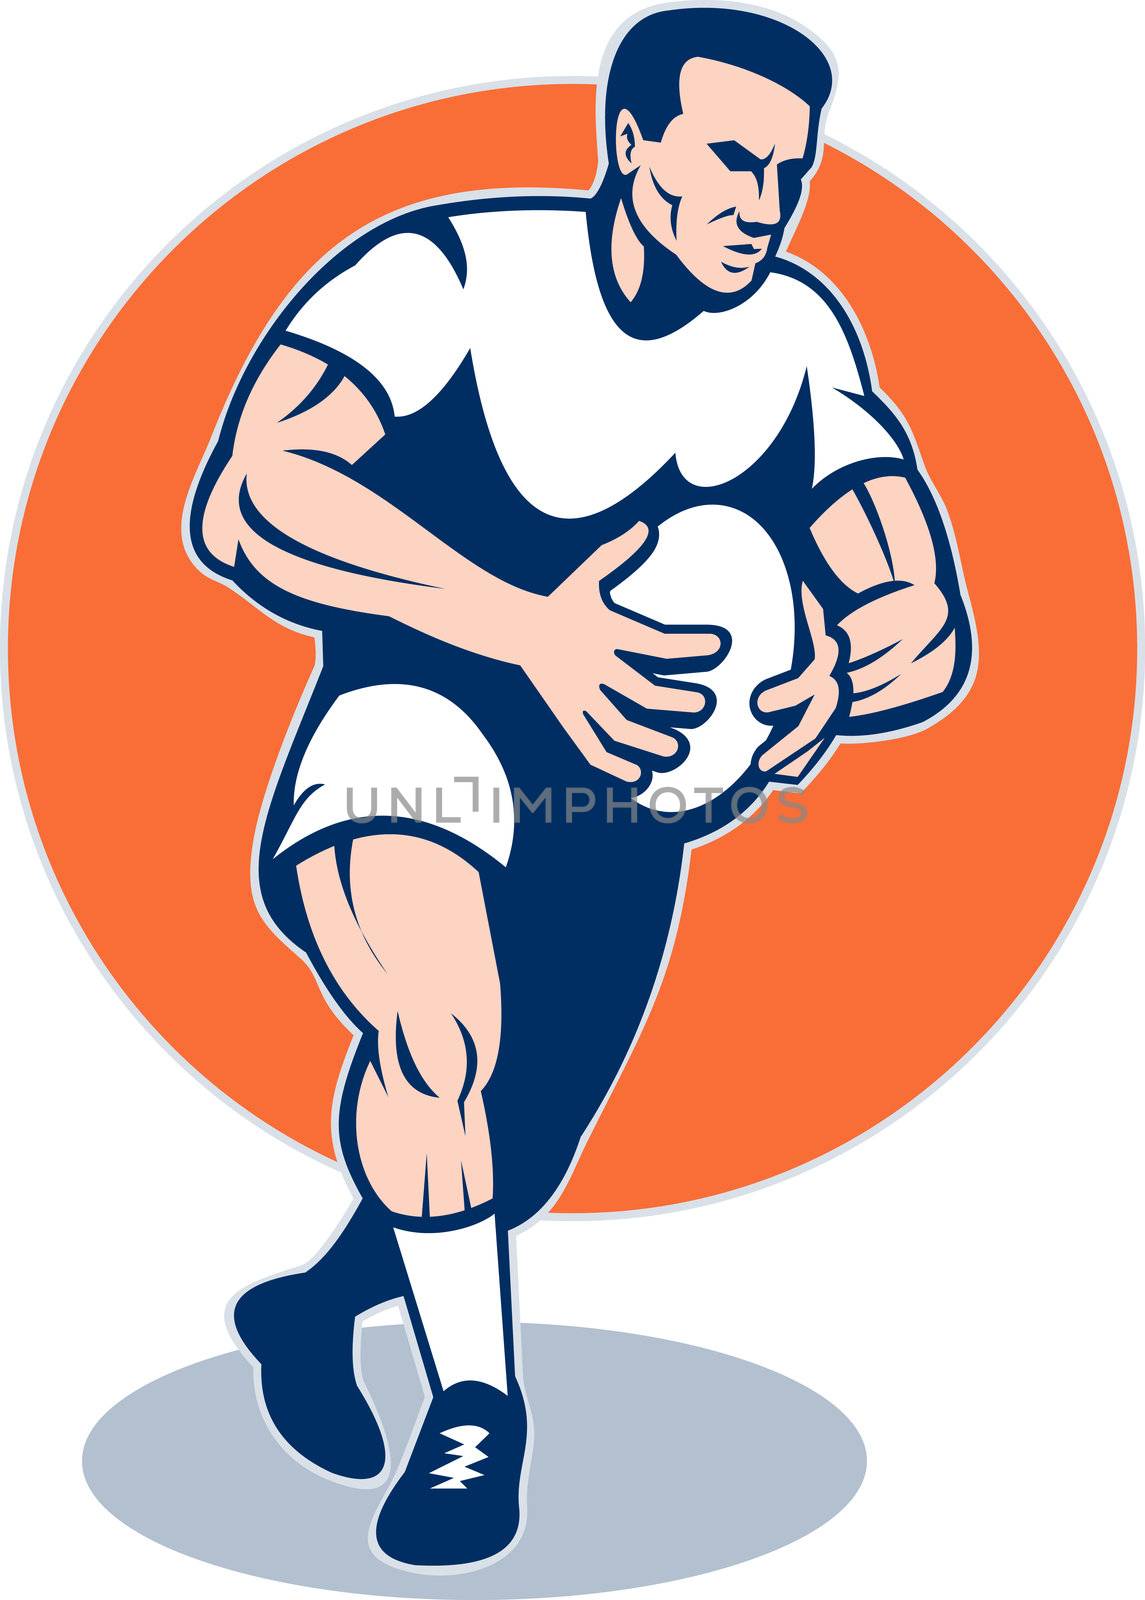 illustration of a rugby player running with ball done in retro style